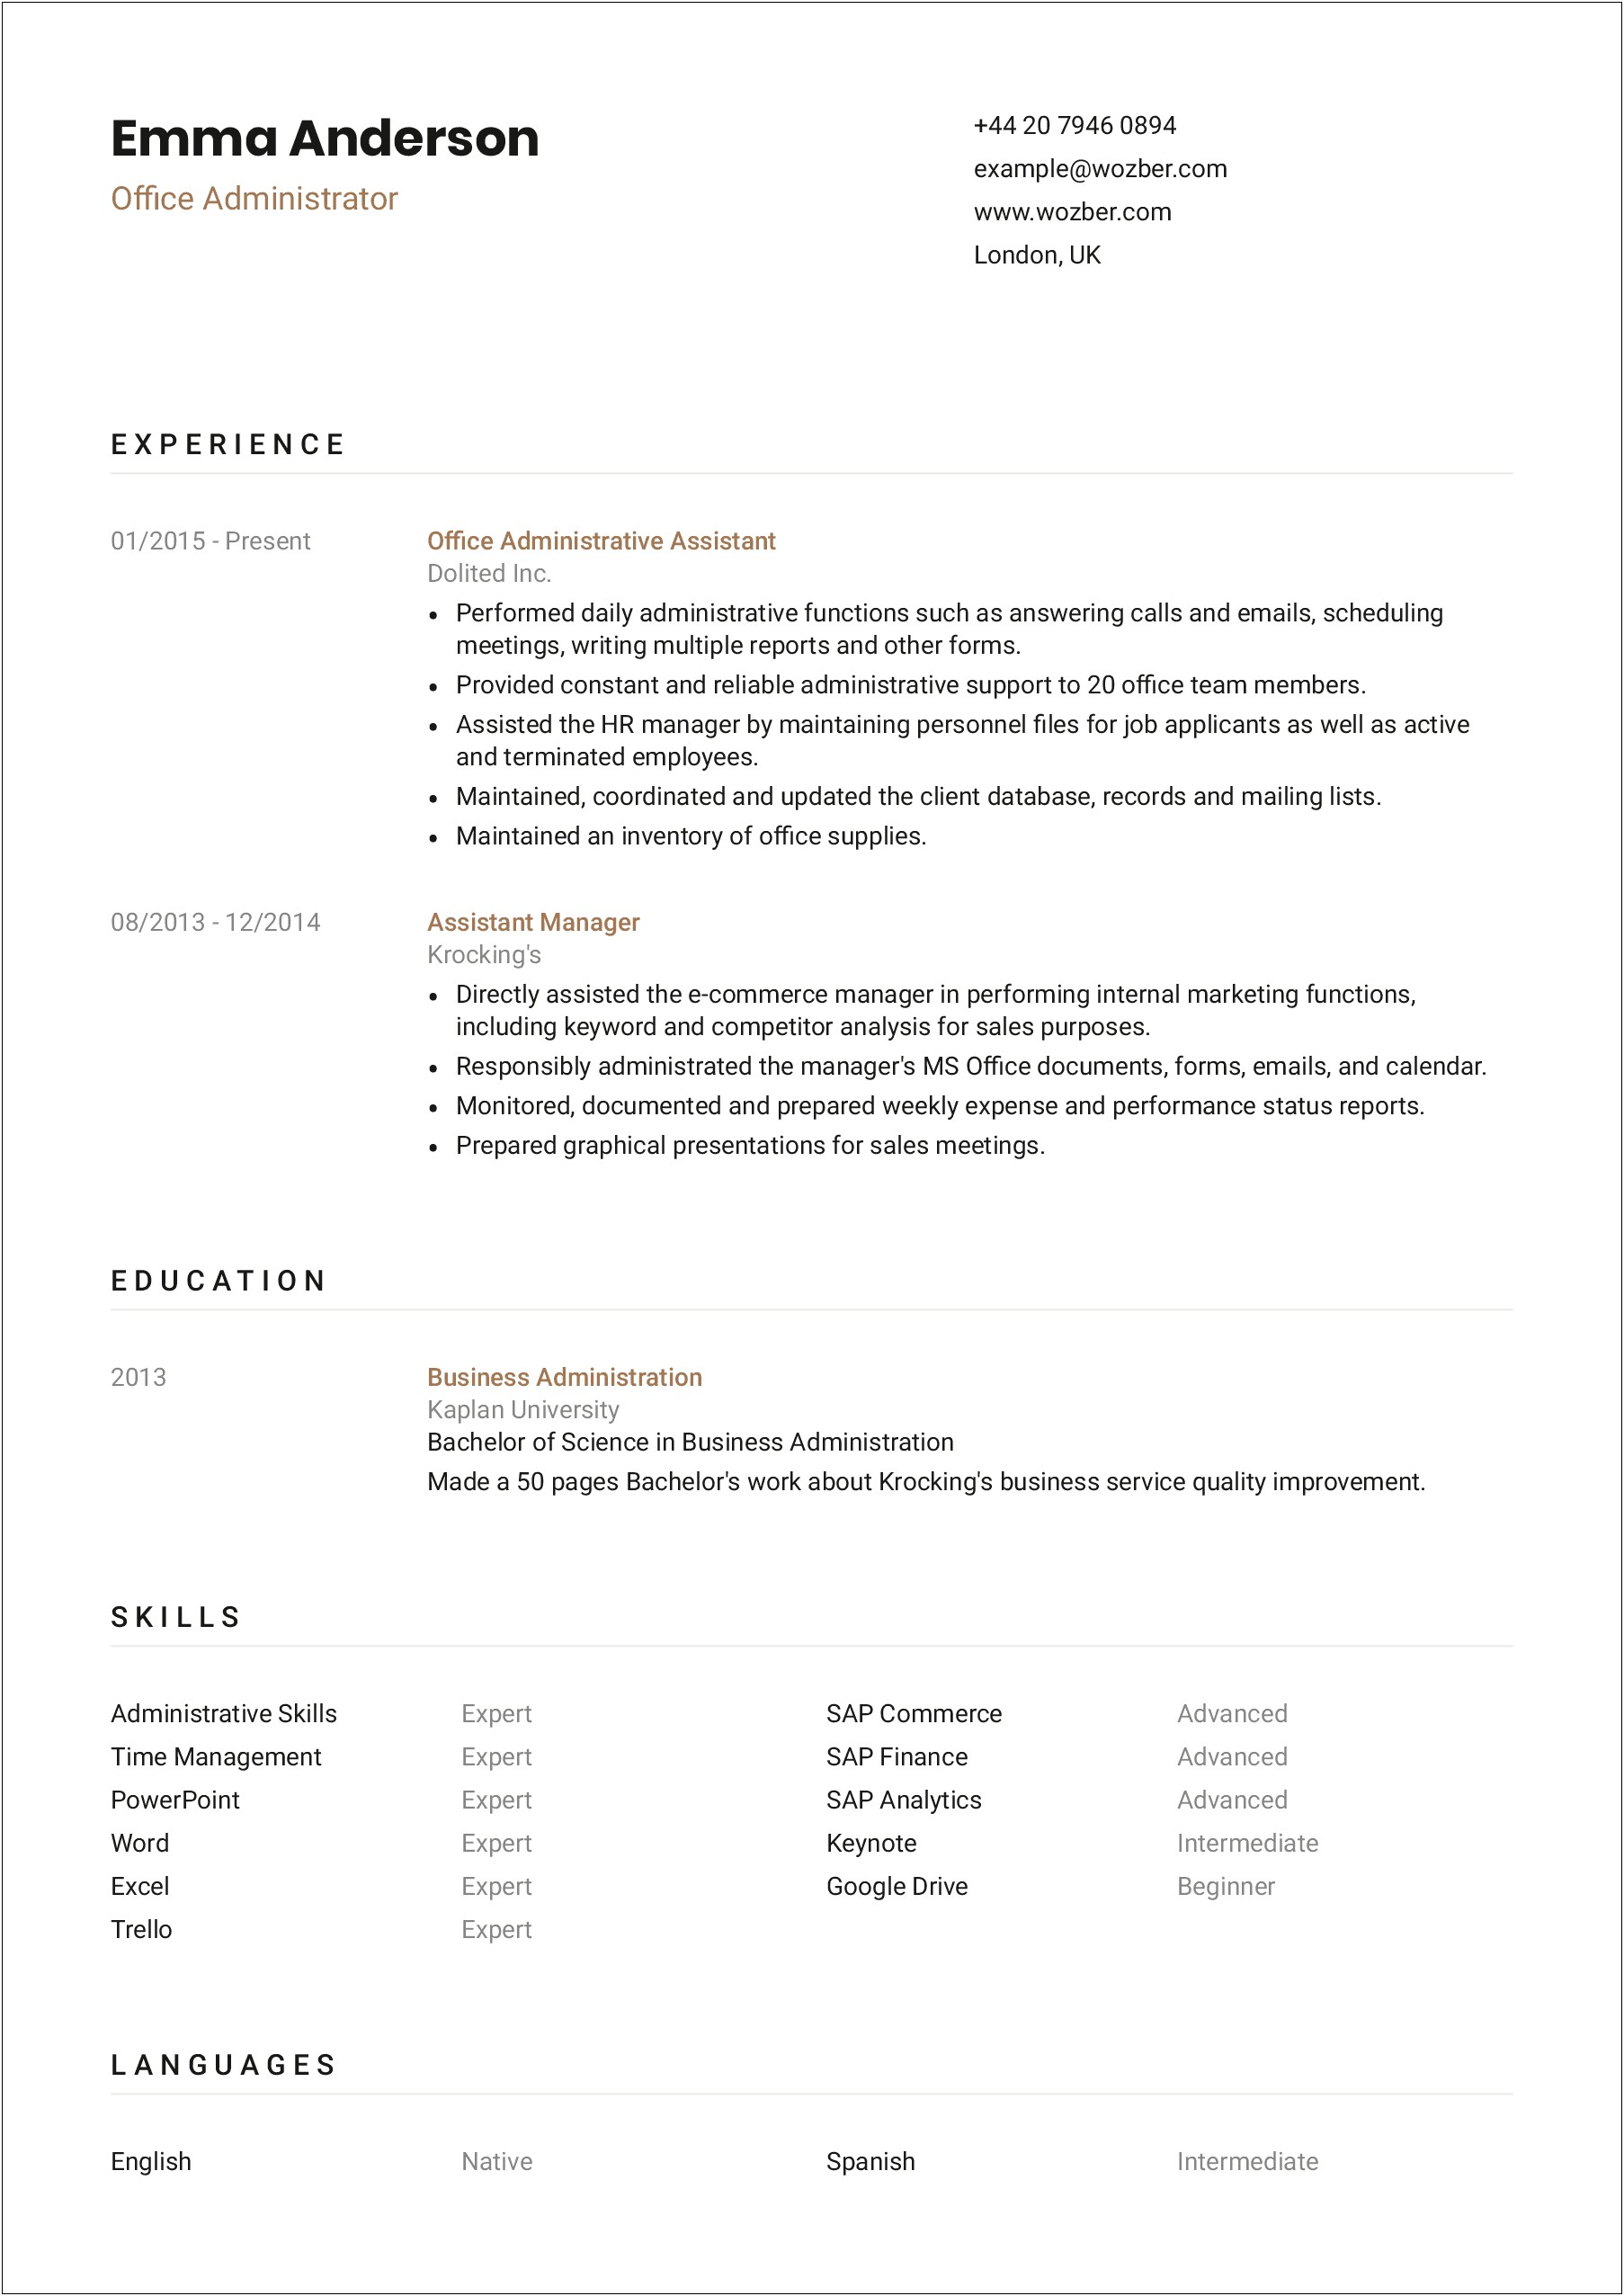 Quality Resume Personal Profile Statement Examples